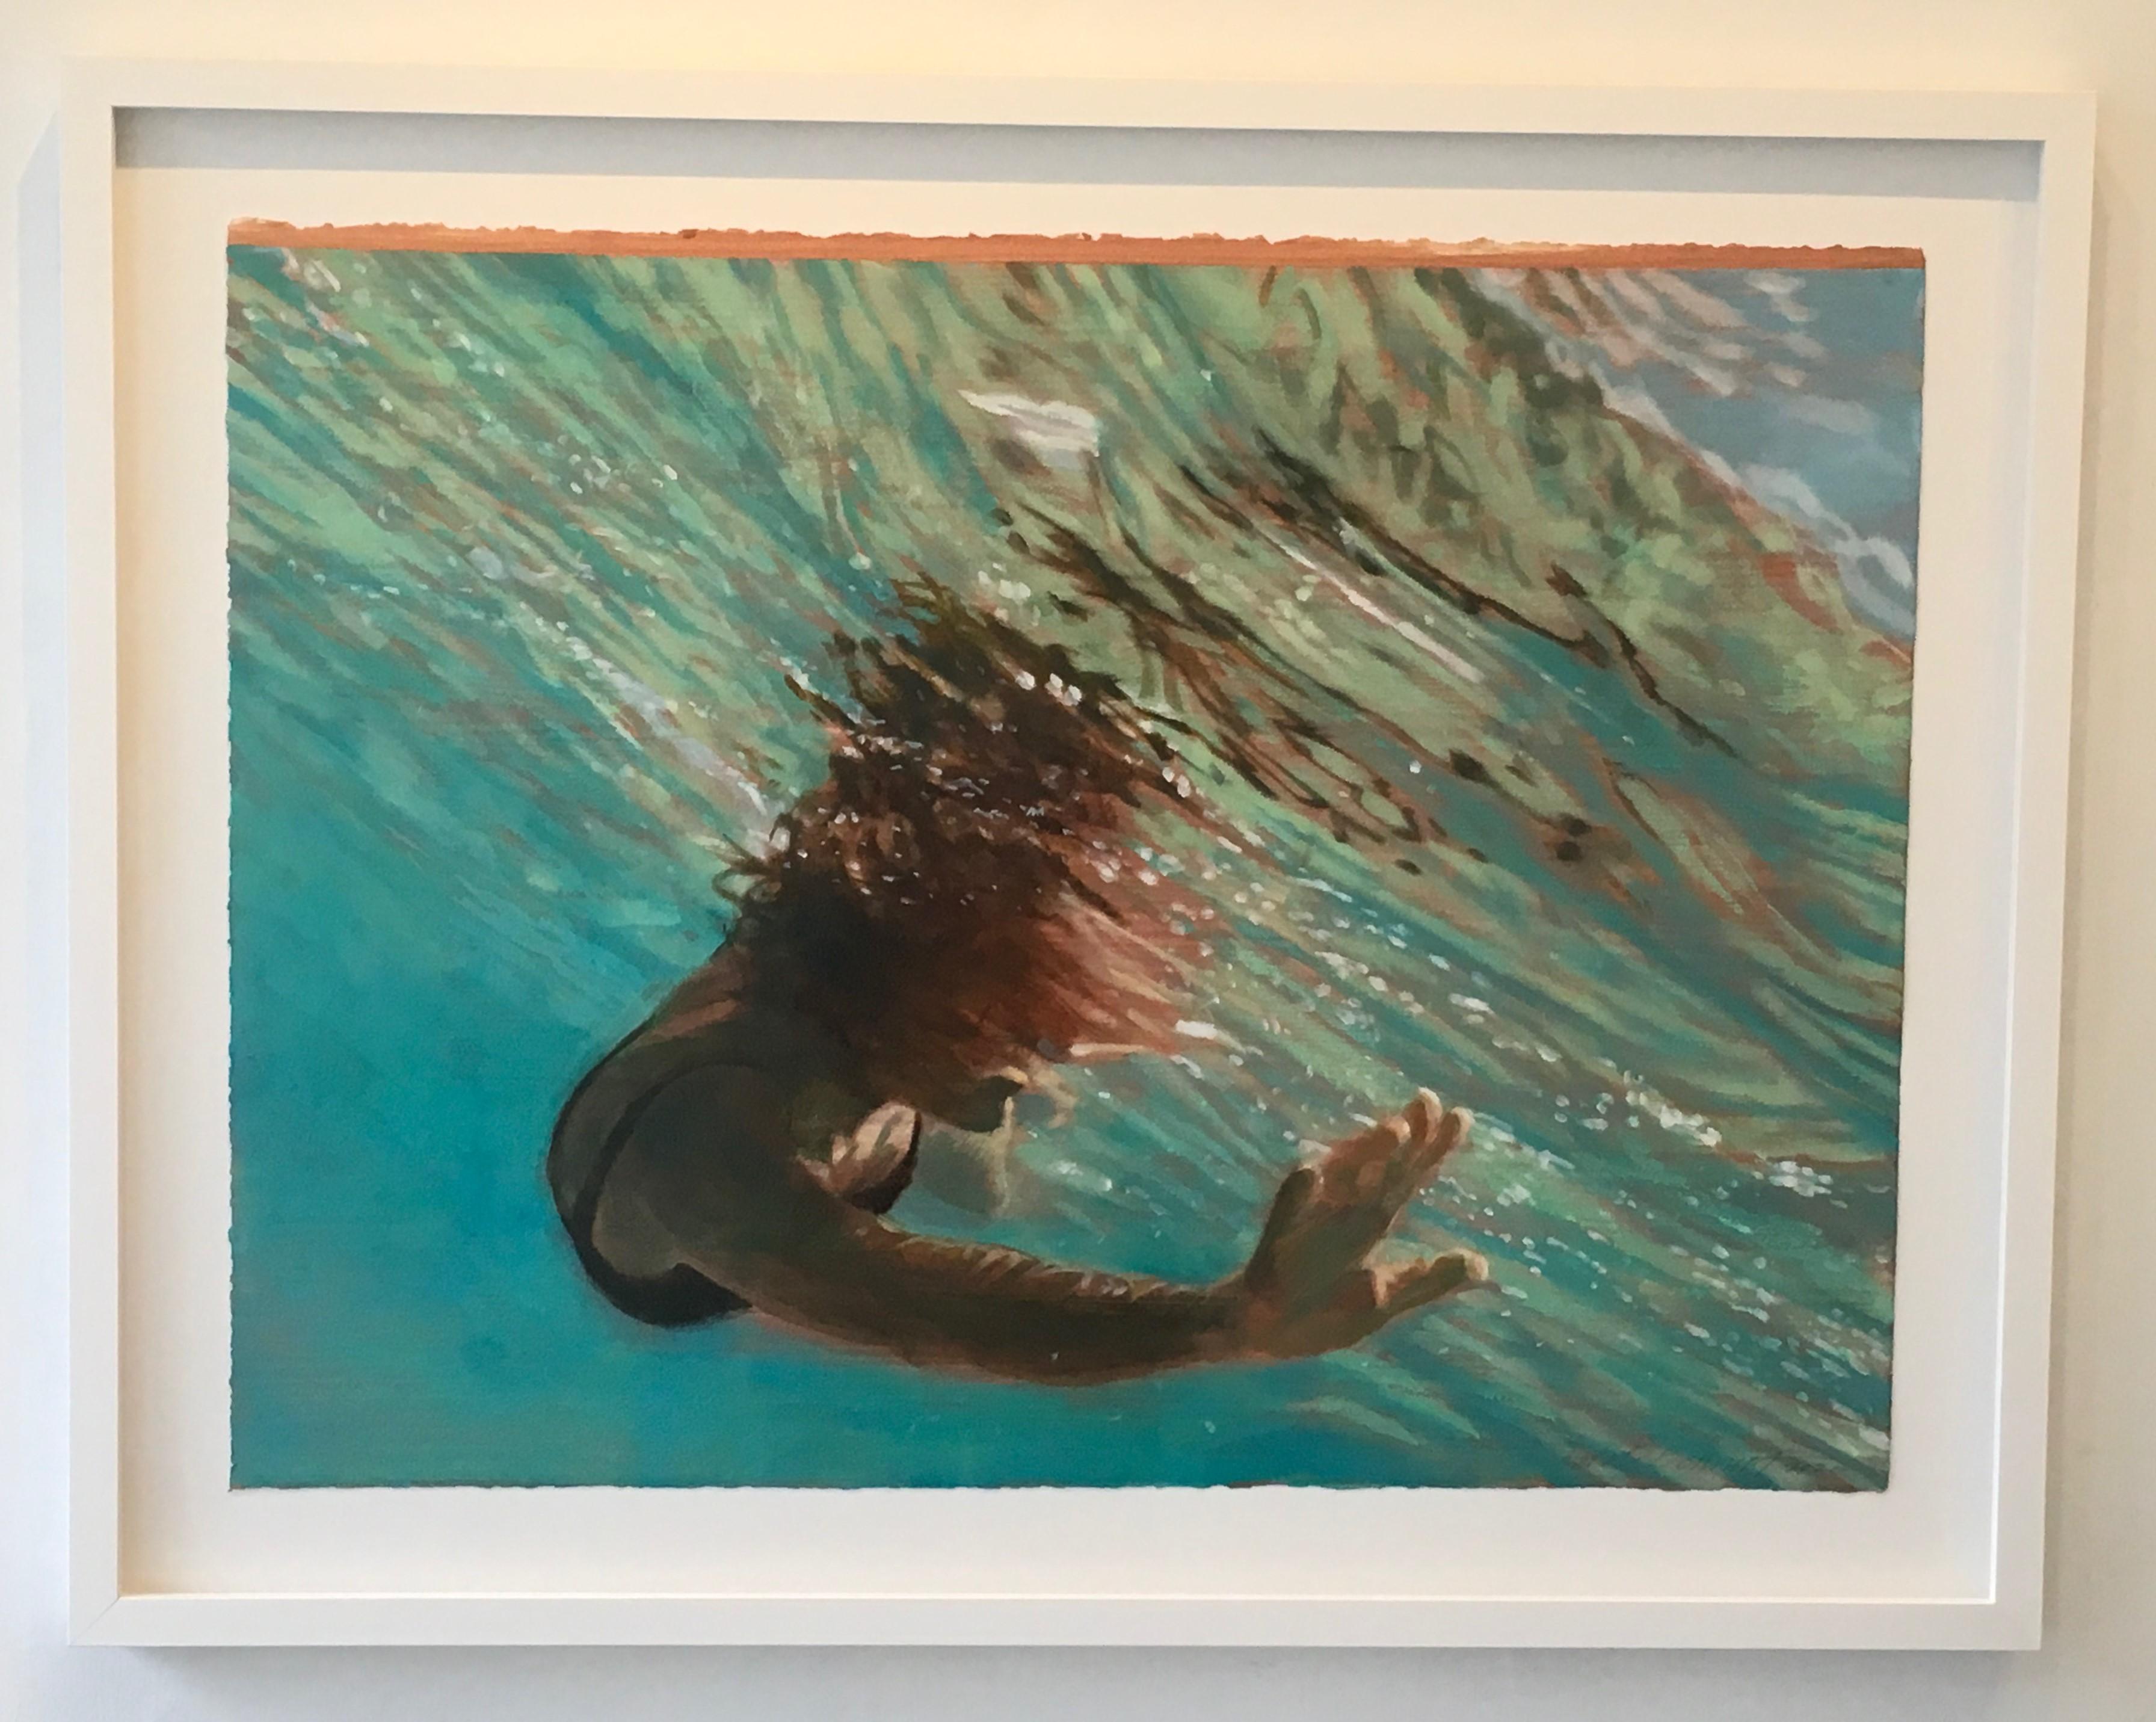 Current, Swimmer, Water, Work on Paper, Blue, Green, Female Figure - Painting by Carol Bennett